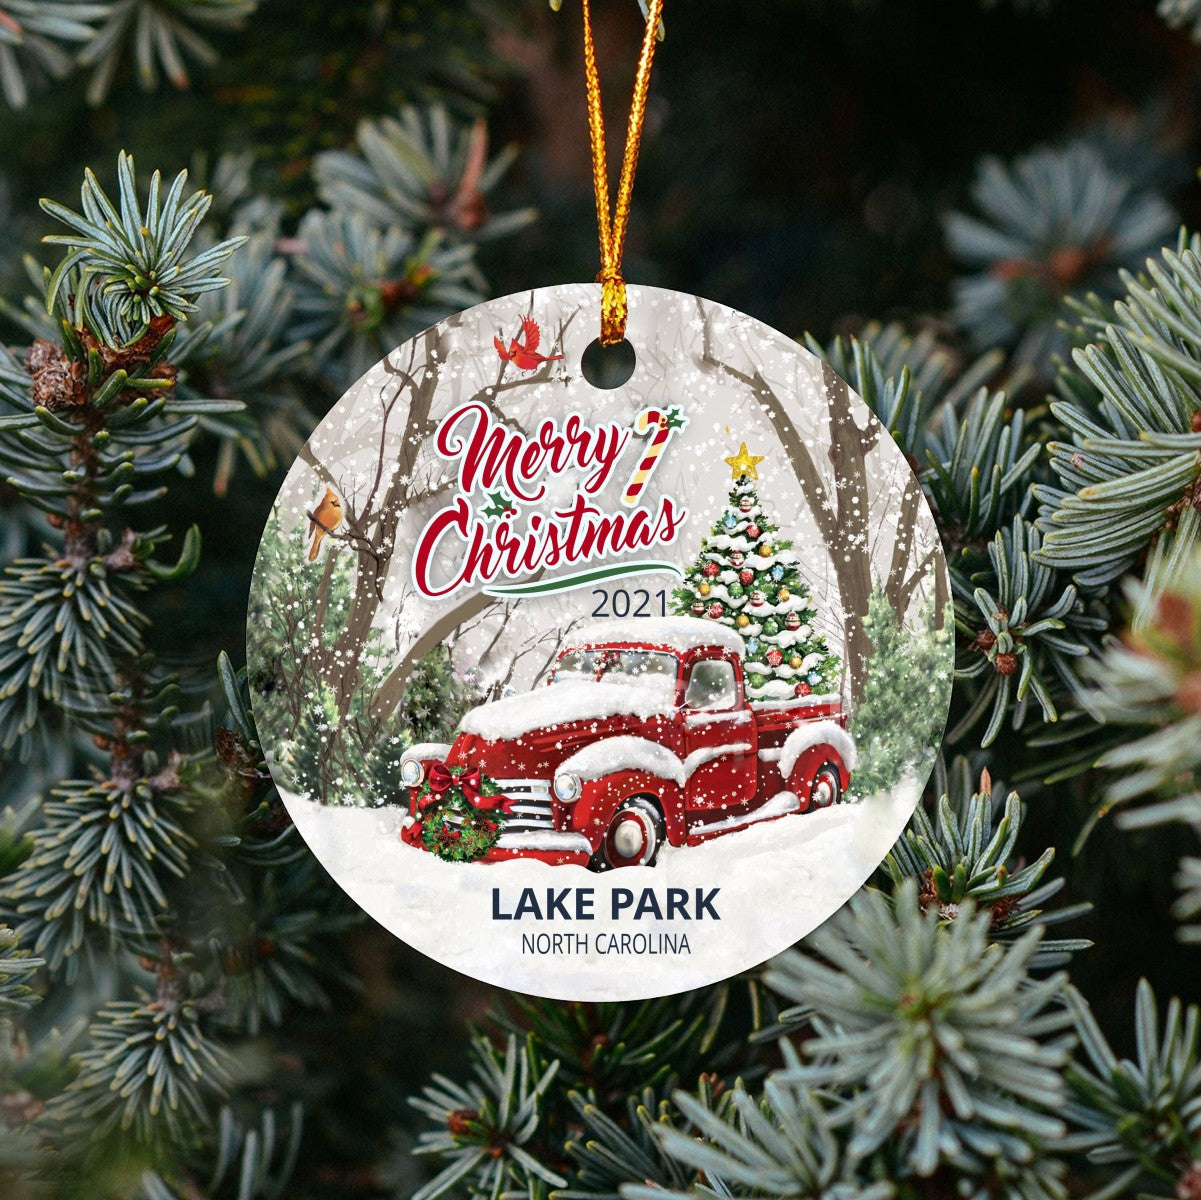 Christmas Tree Ornaments Lake Park - Ornament With Name City, State Lake Park North Carolina NC Ornament - Red Truck Xmas Ornaments 3'' Plastic Gift For Family, Friend And Housewarming